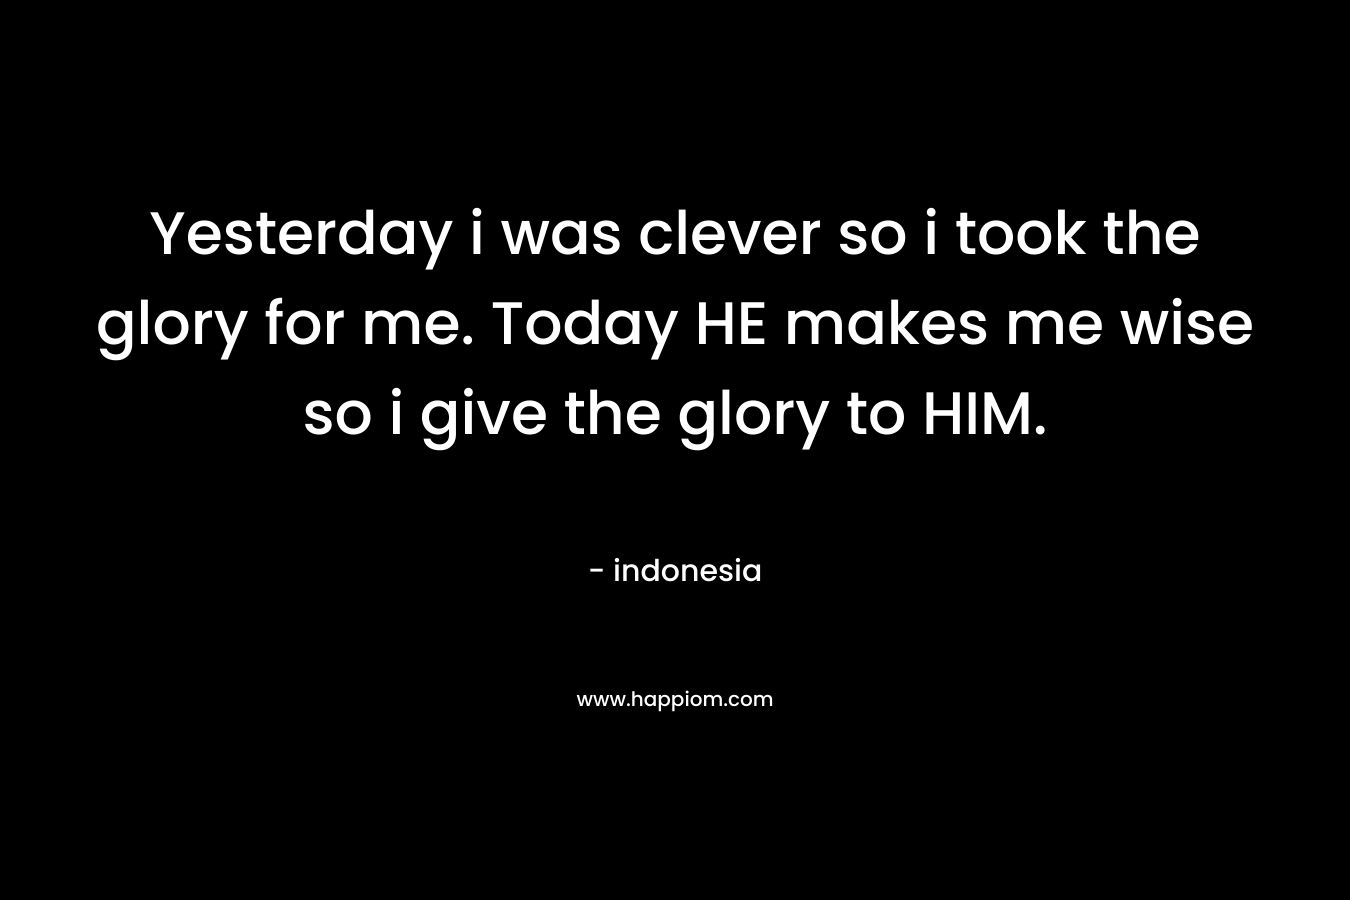 Yesterday i was clever so i took the glory for me. Today HE makes me wise so i give the glory to HIM.